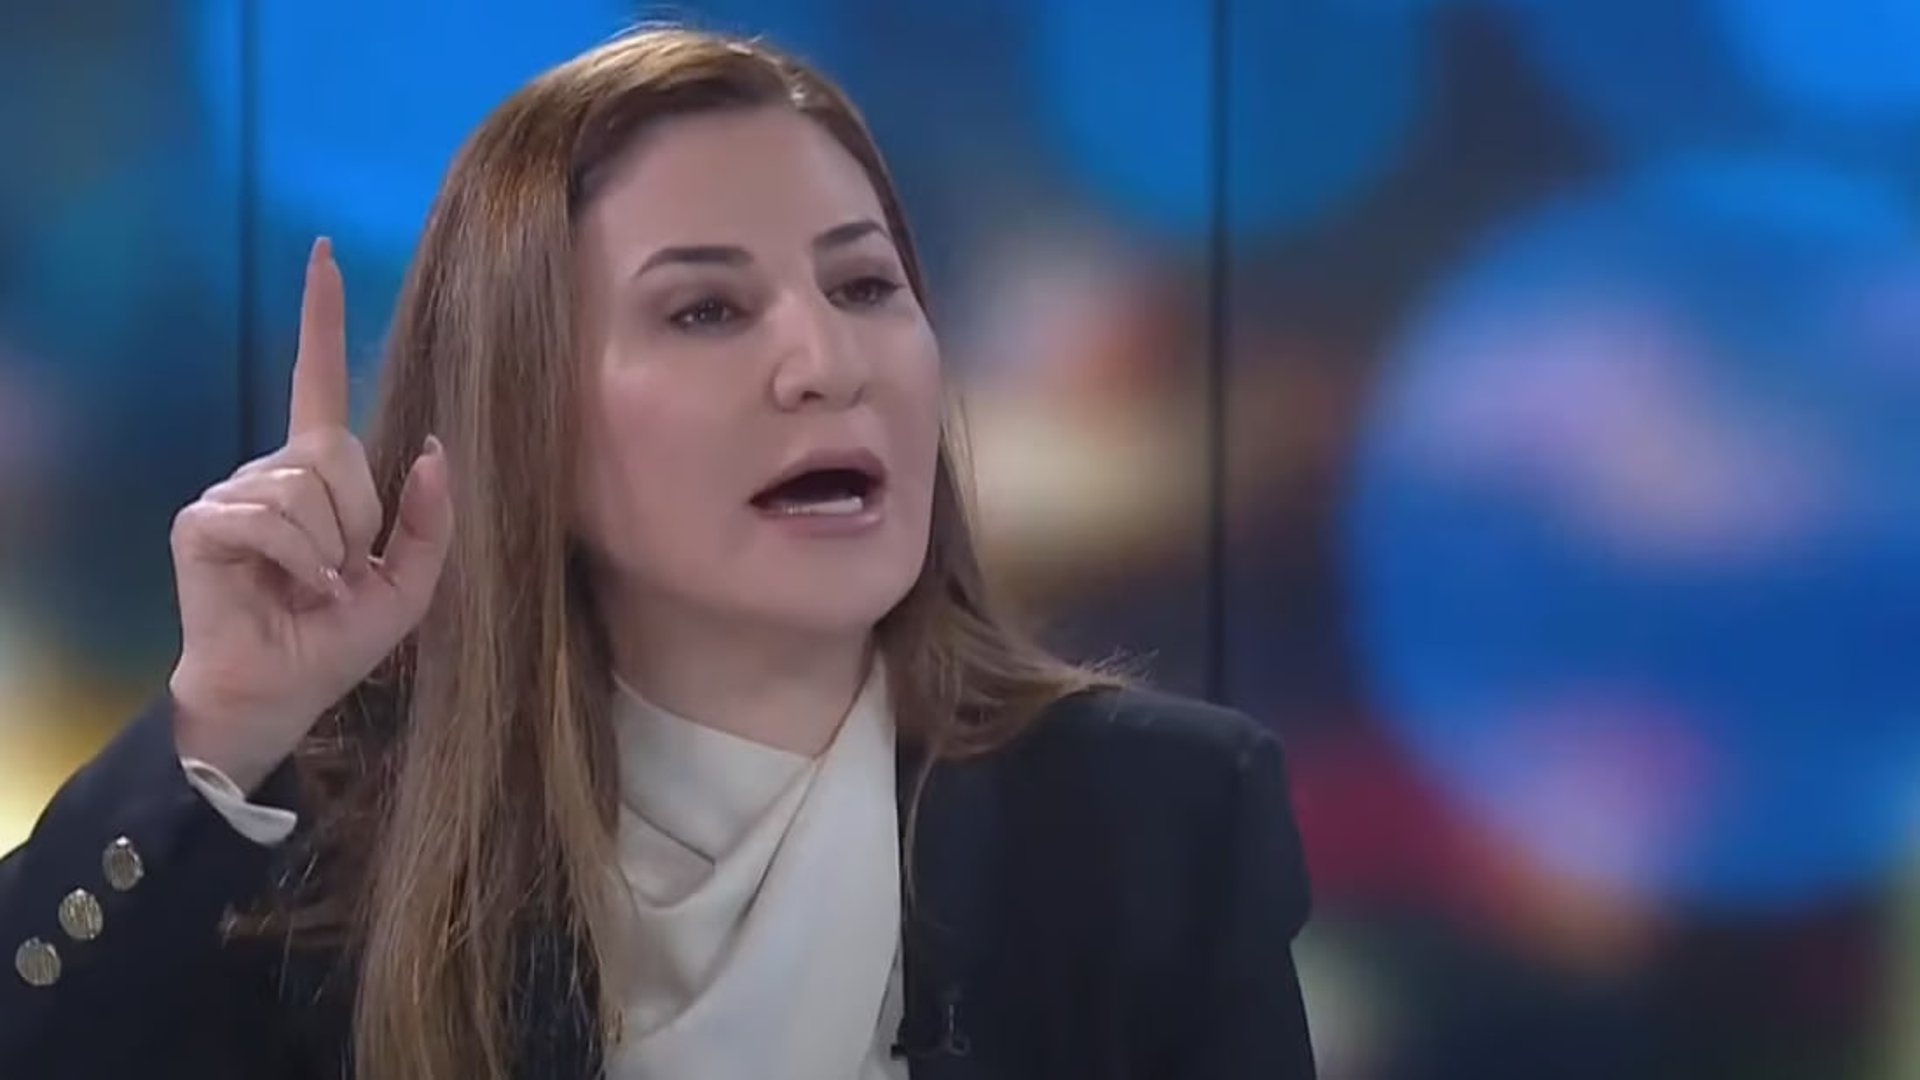 Iraqi MP Viyan Dakhil slams interview with exISIS leaders wife demands justice for Yazidi victims